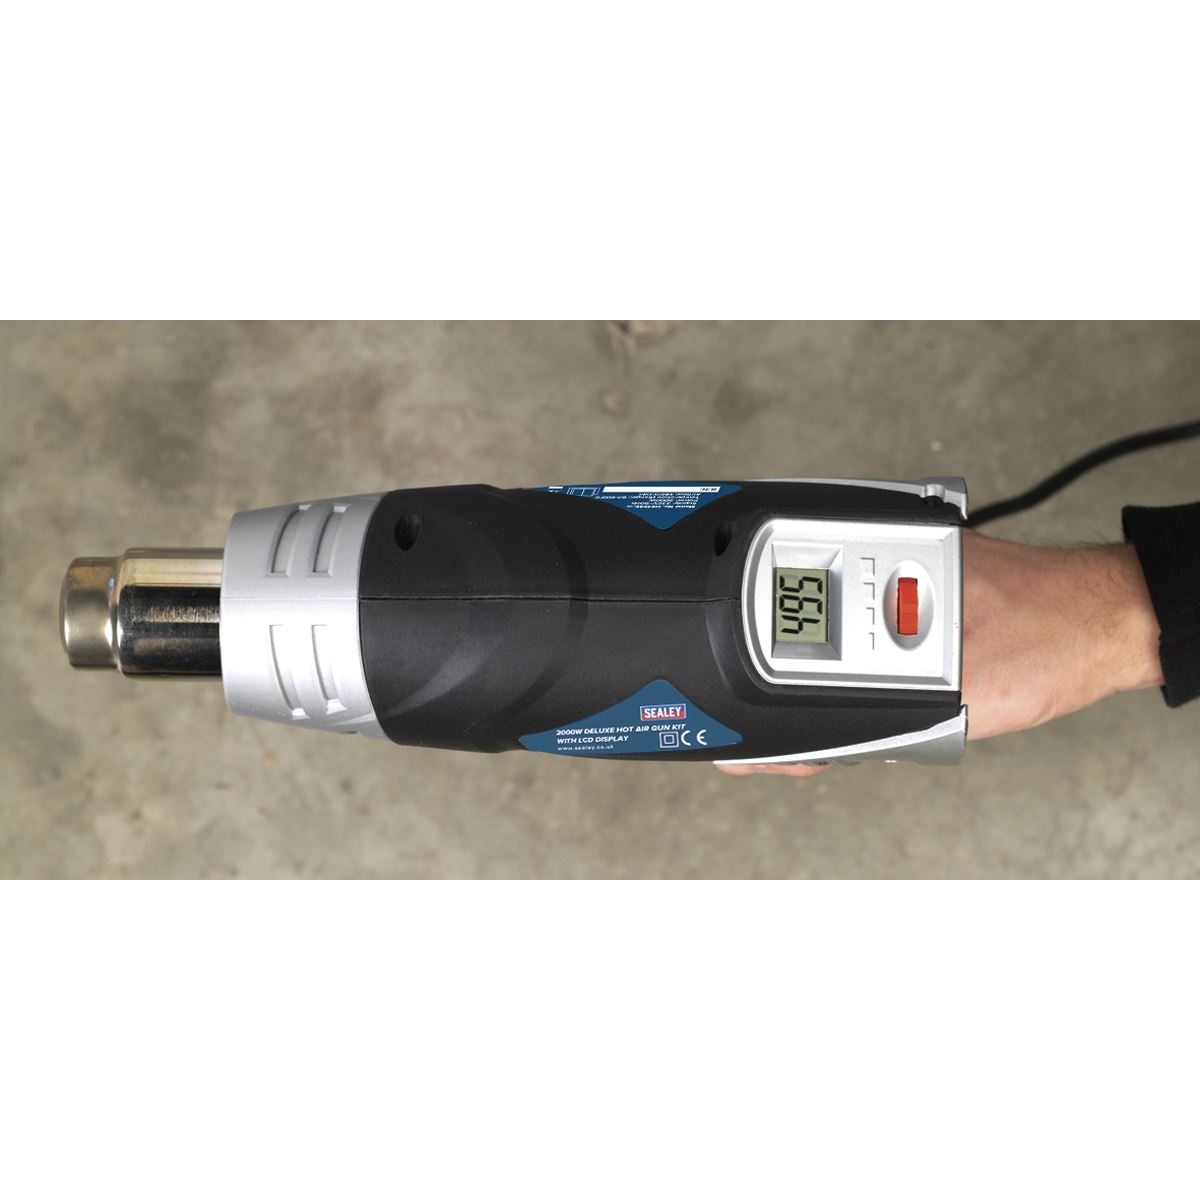 Sealey Deluxe Hot Air Gun Kit with LED Display 2000W 80-600°C